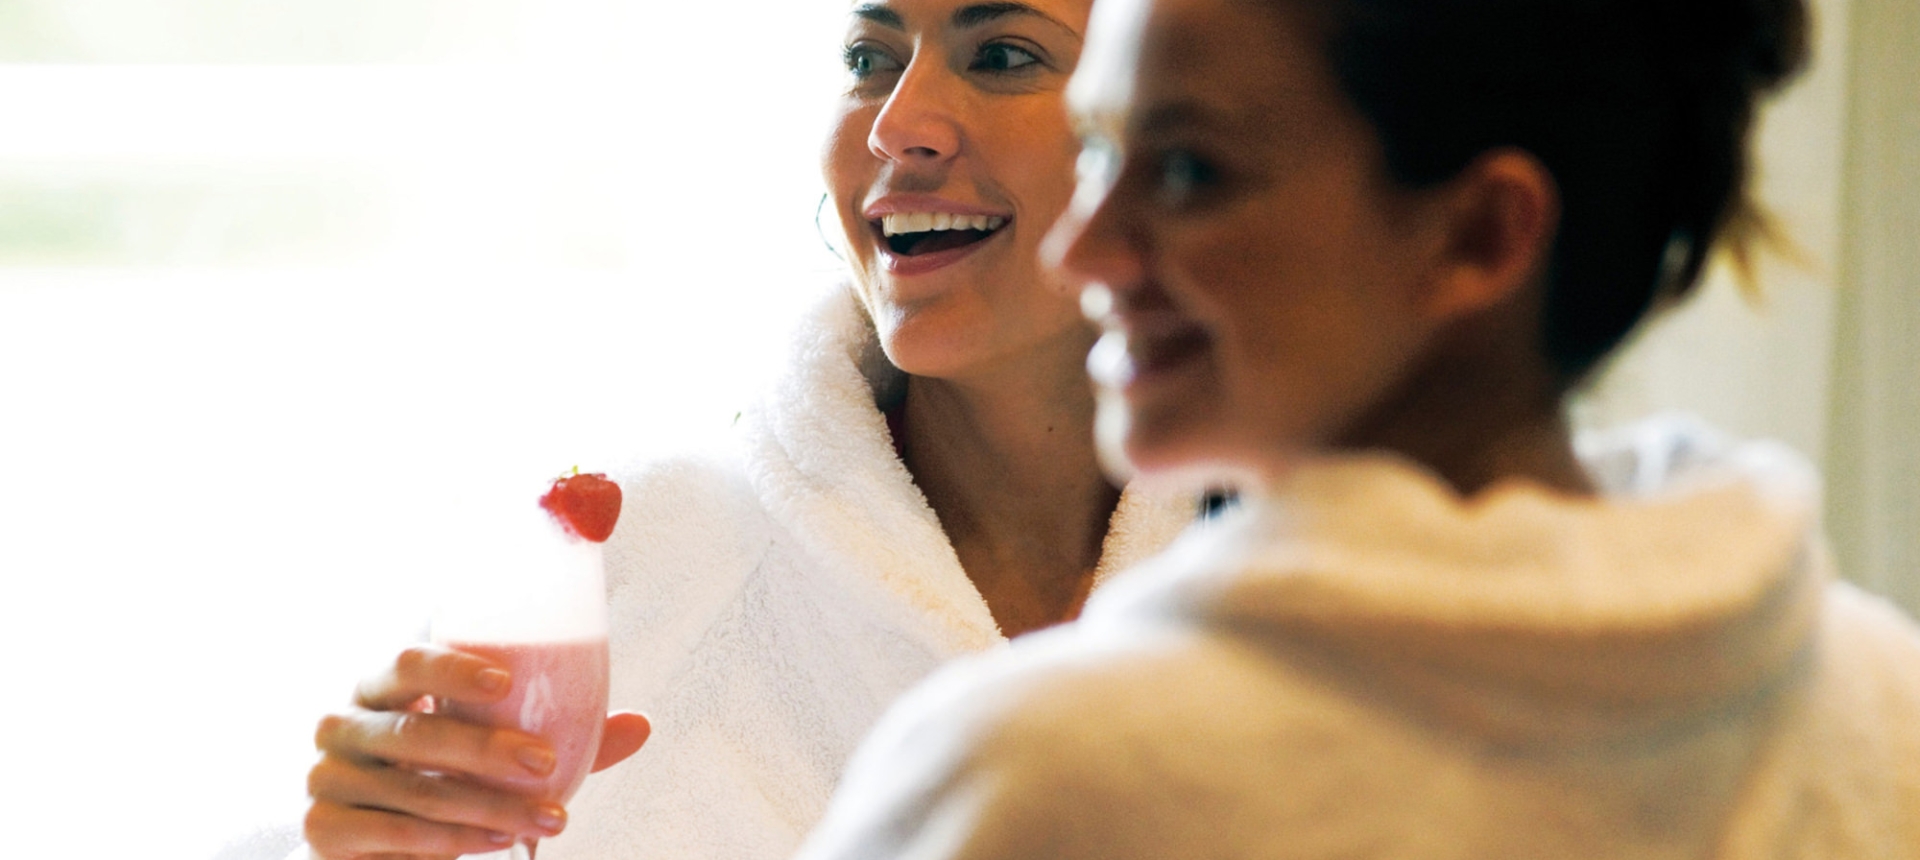 two woman in robes enjoying themselves with one of them holding a drink